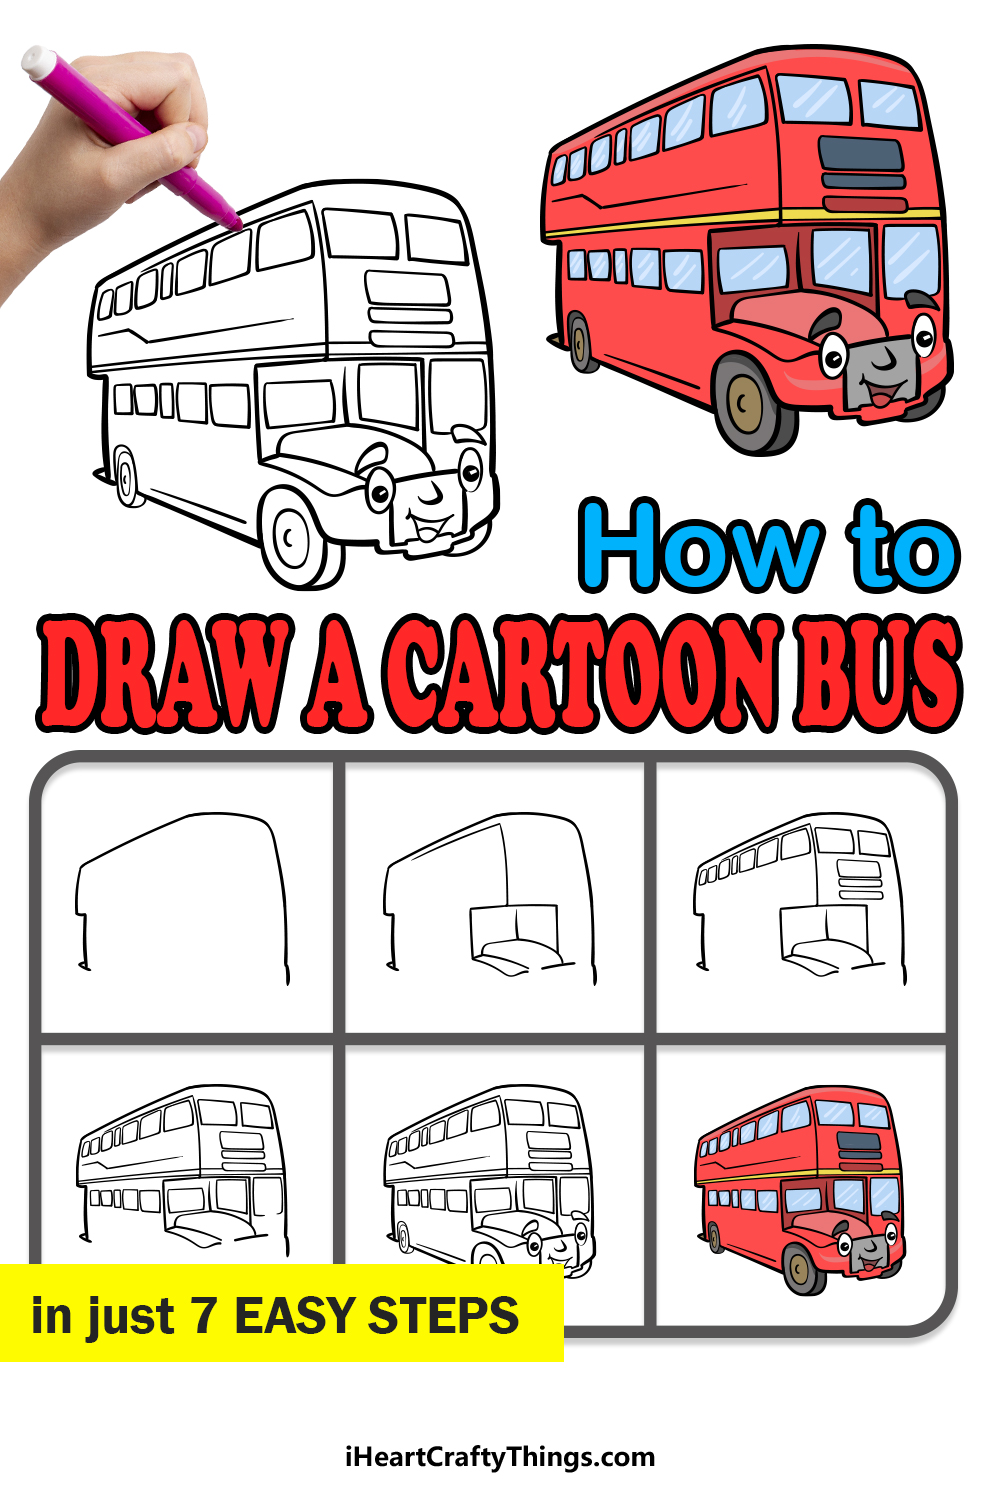 how to draw a cartoon bus in 7 easy steps